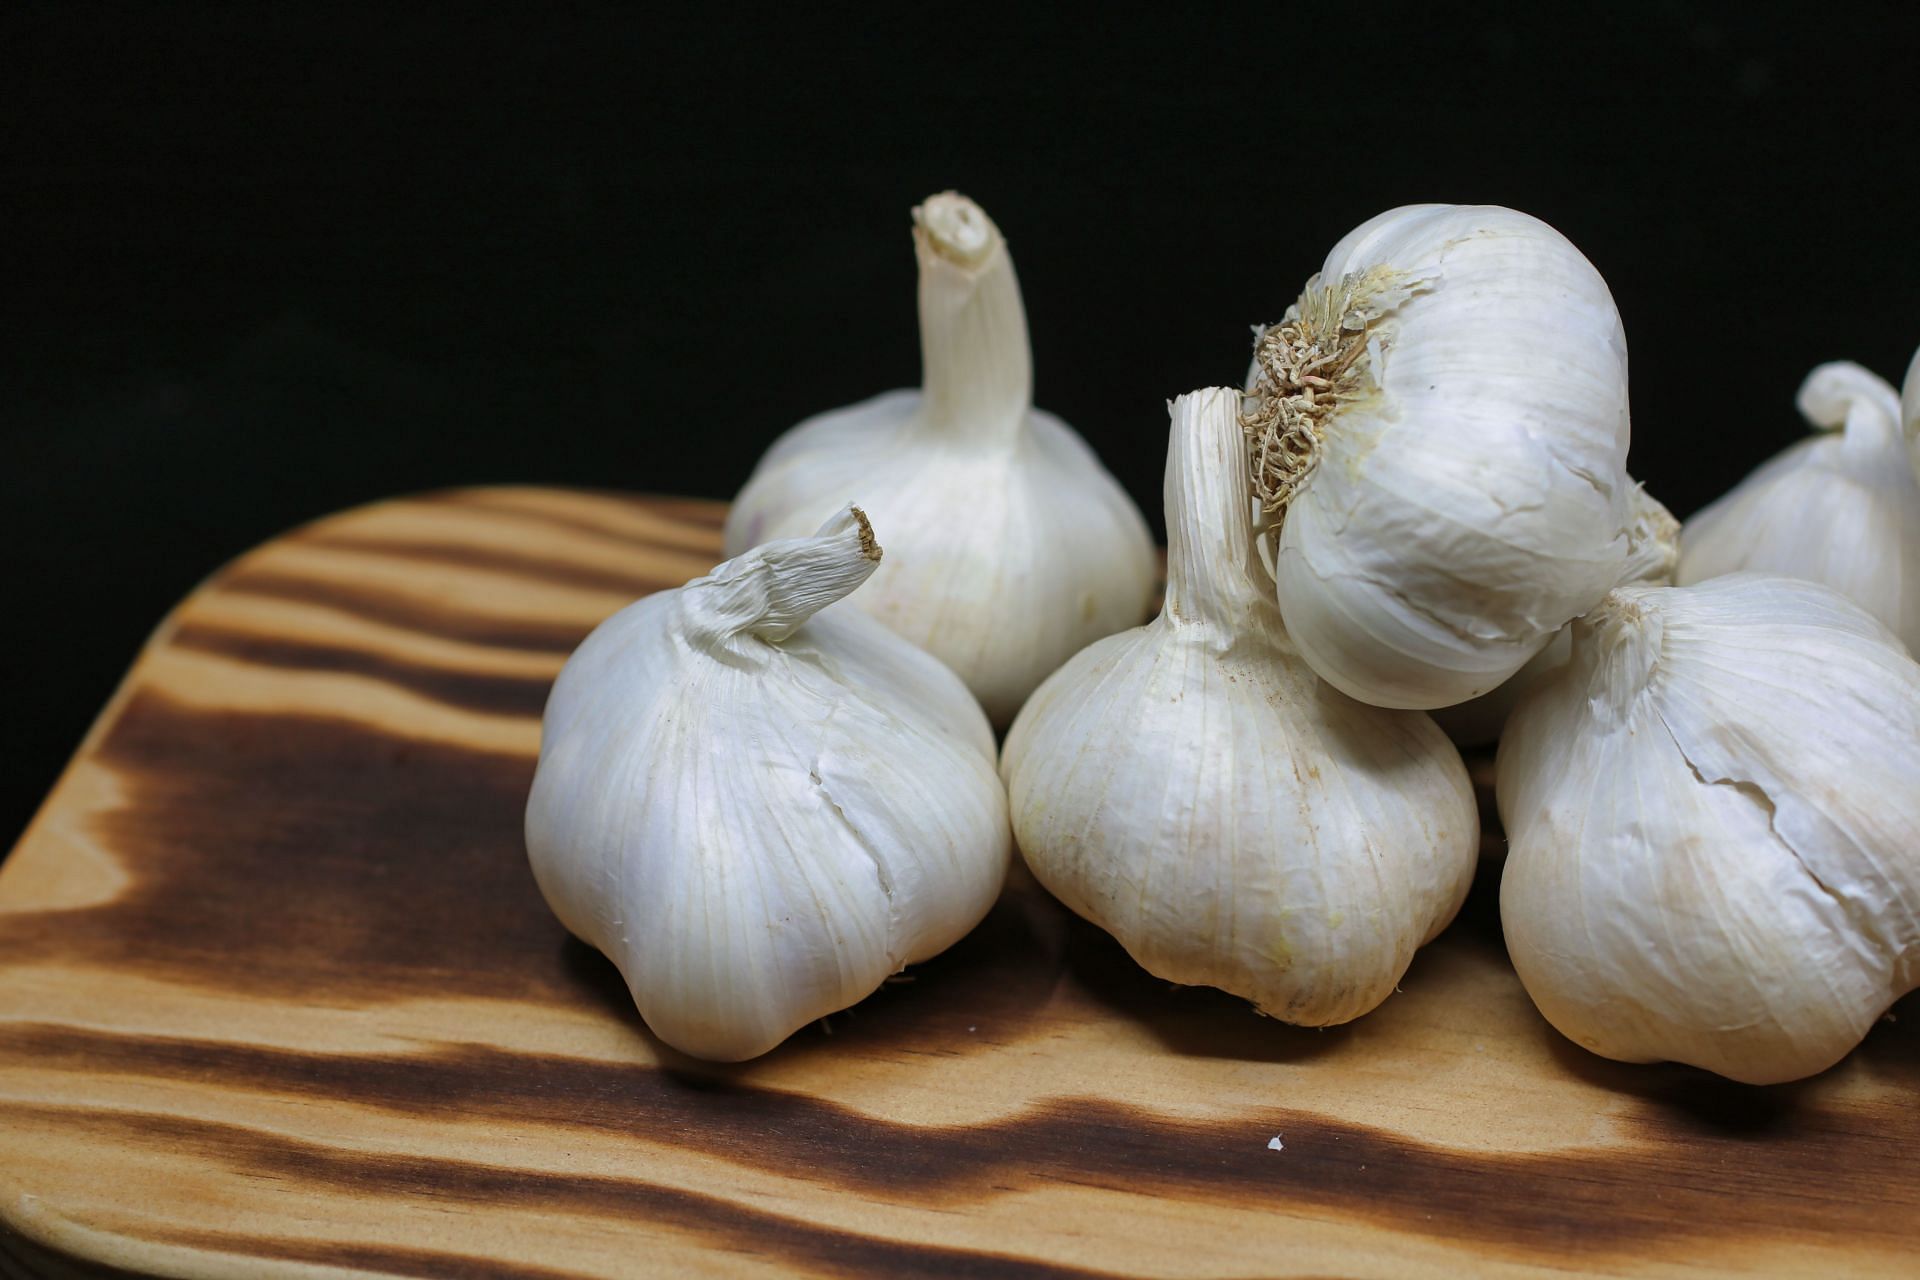 Black garlic is made by fermenting the raw garlic. (Image via Pexels/ Nick Collins)